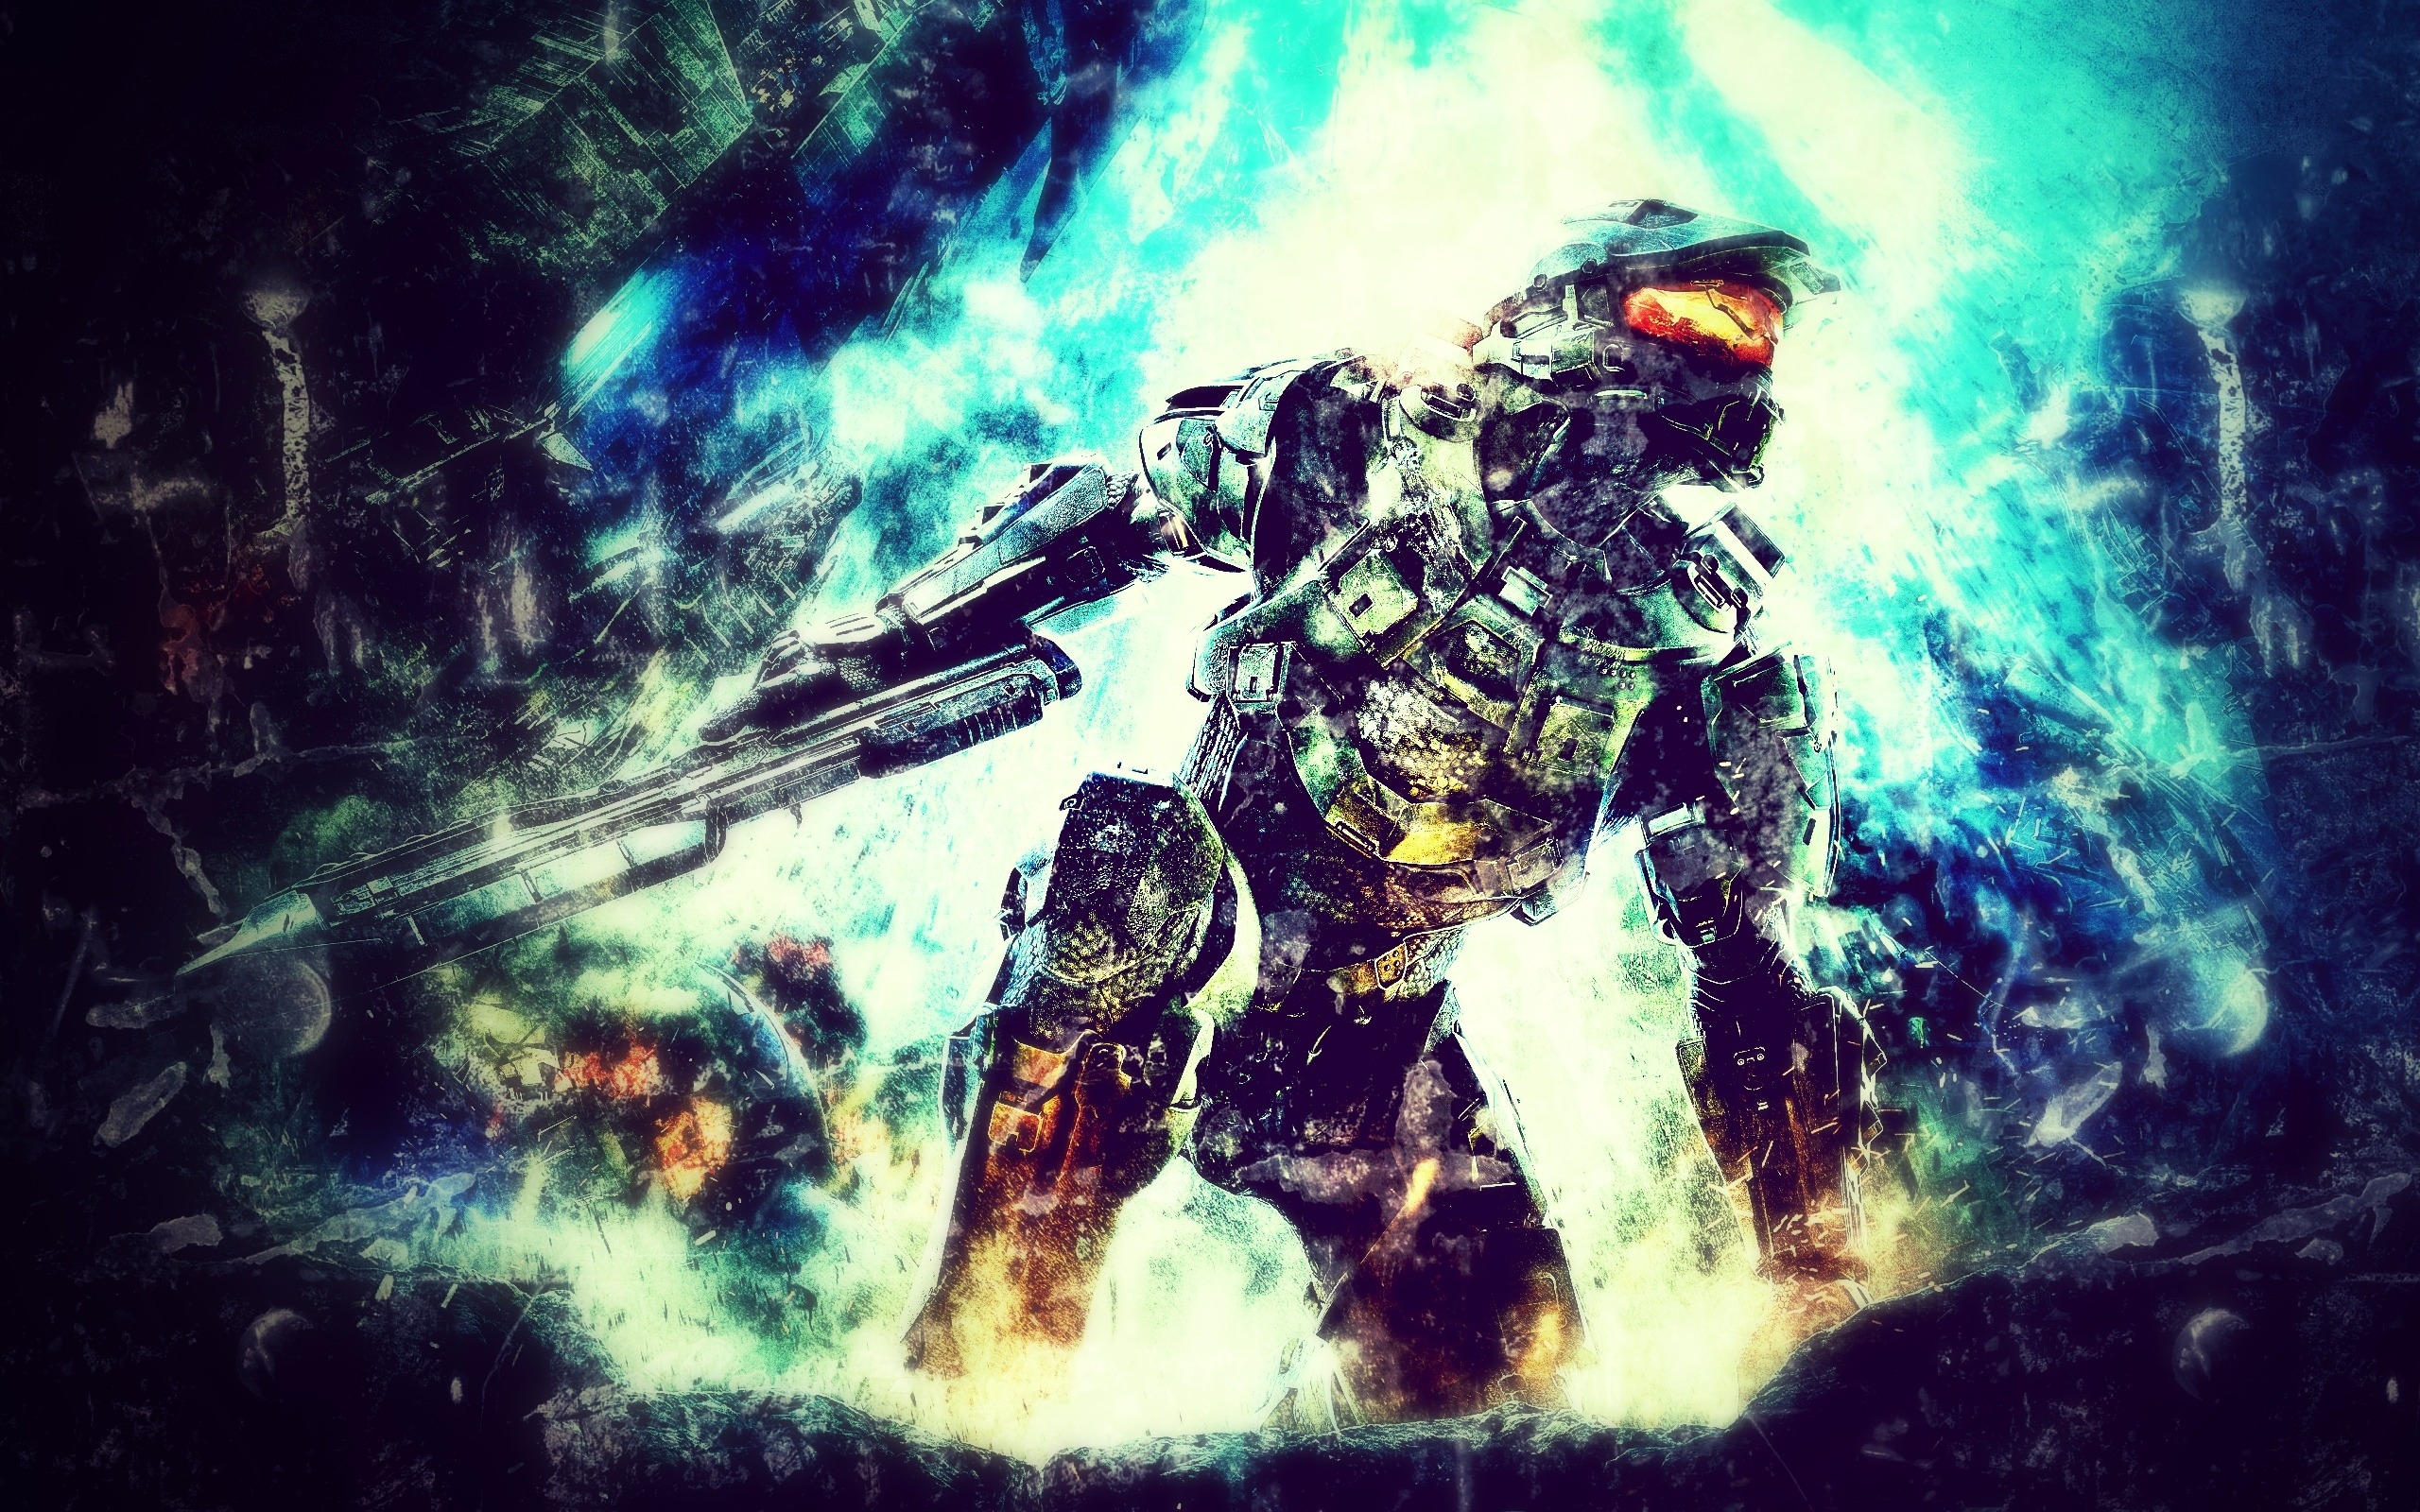 Halo 4 for 2560 x 1600 widescreen resolution